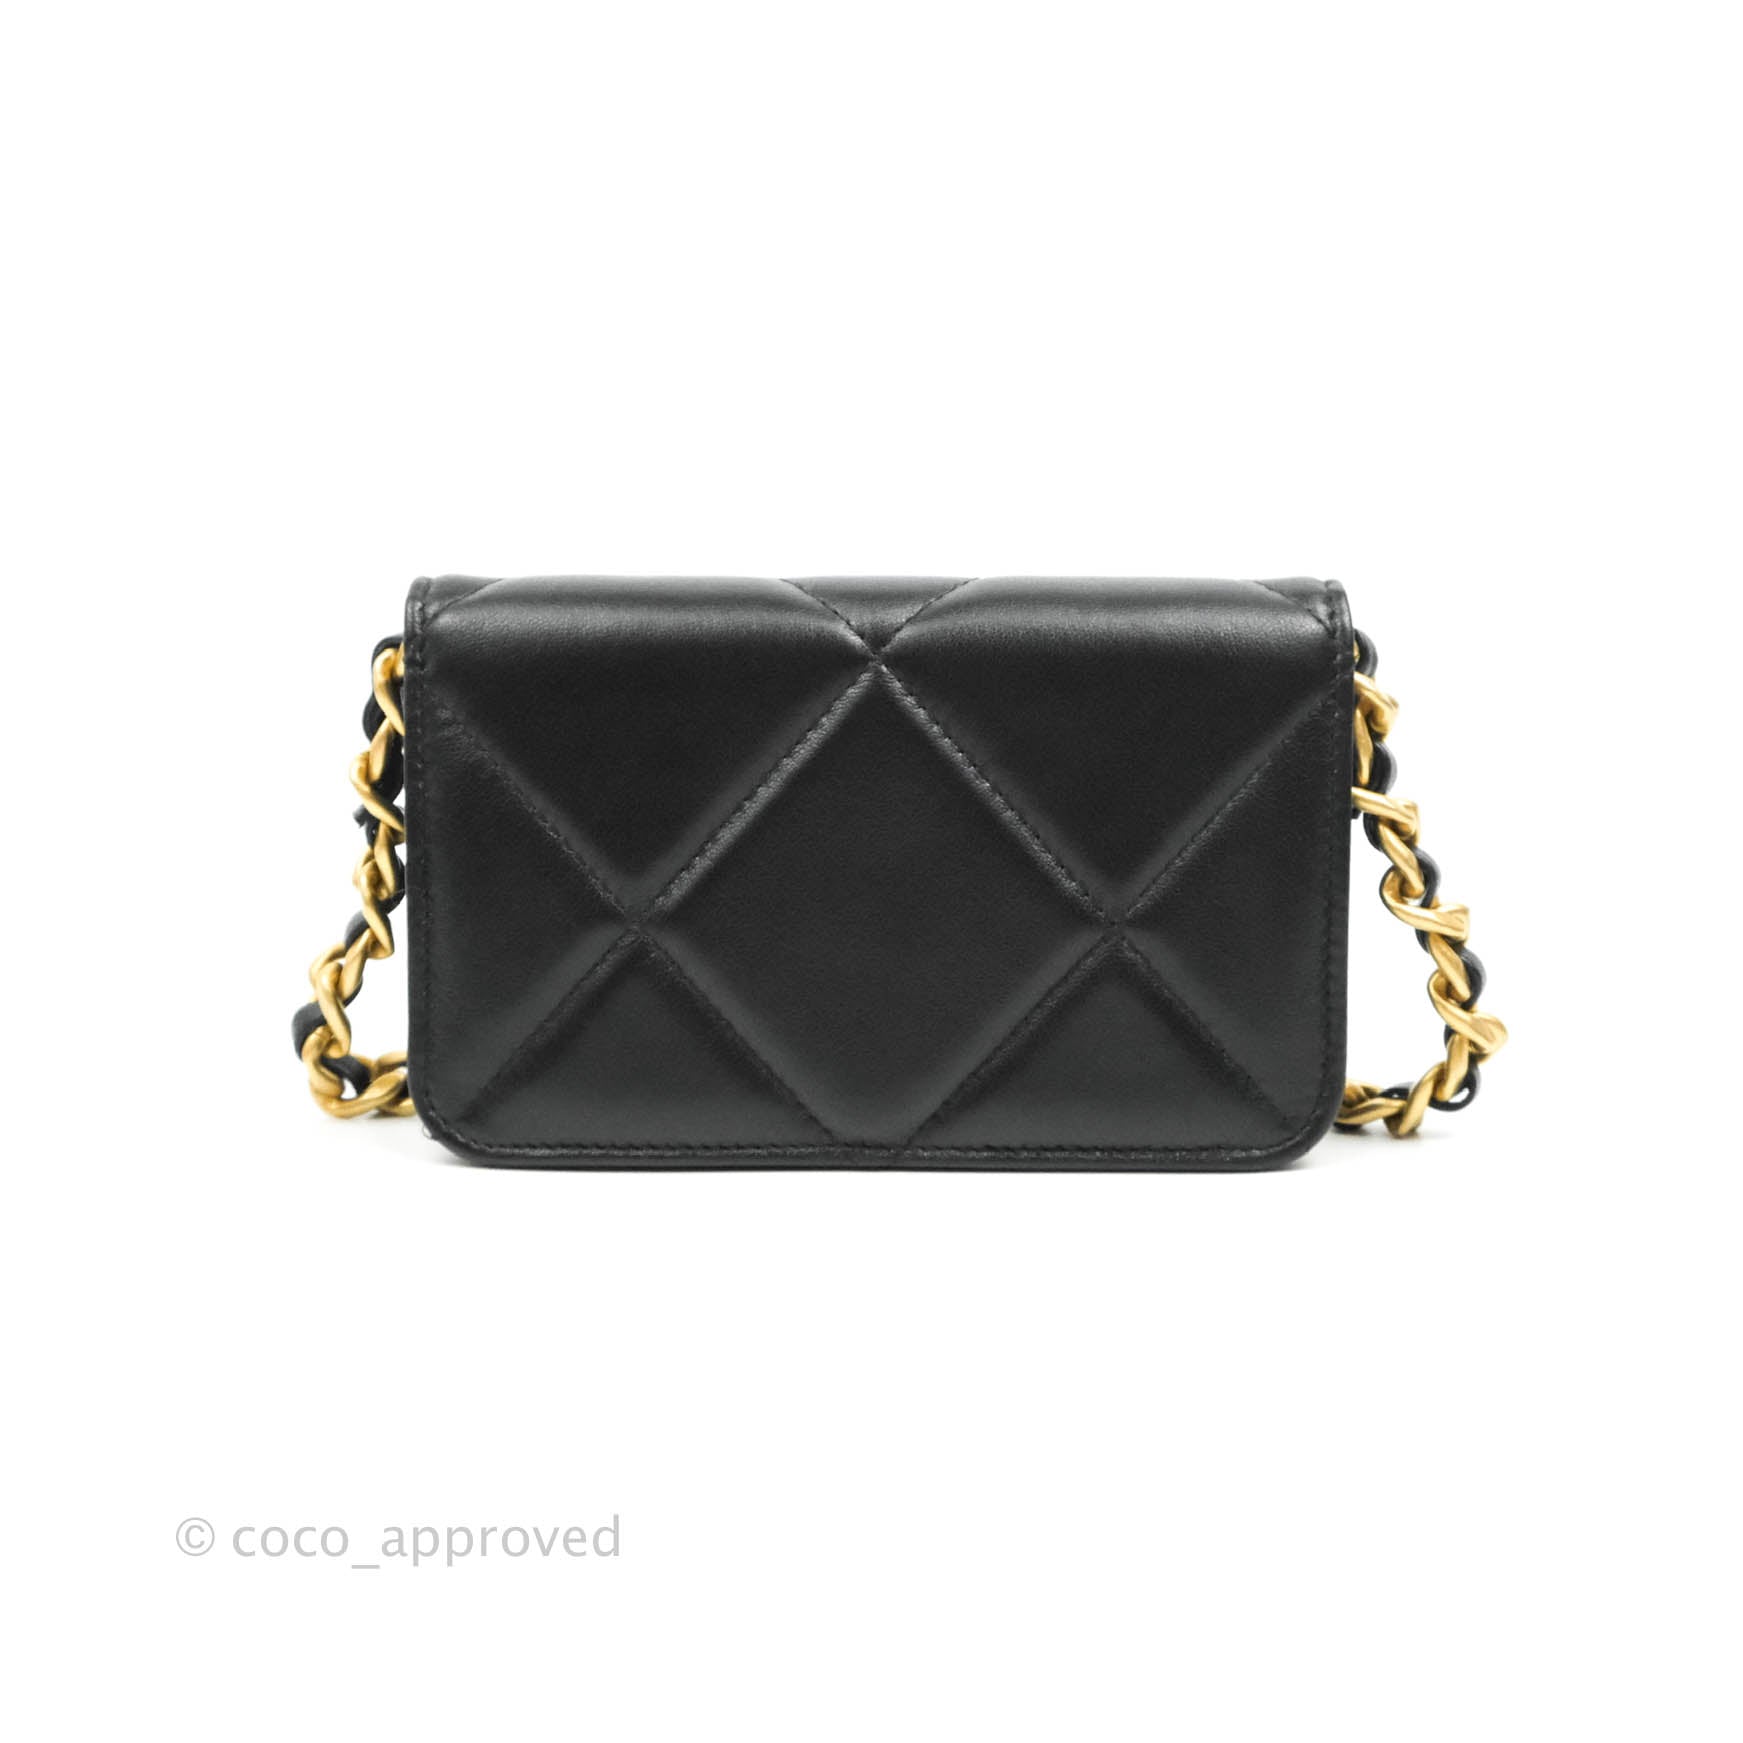 Clutch with chain - Chanel